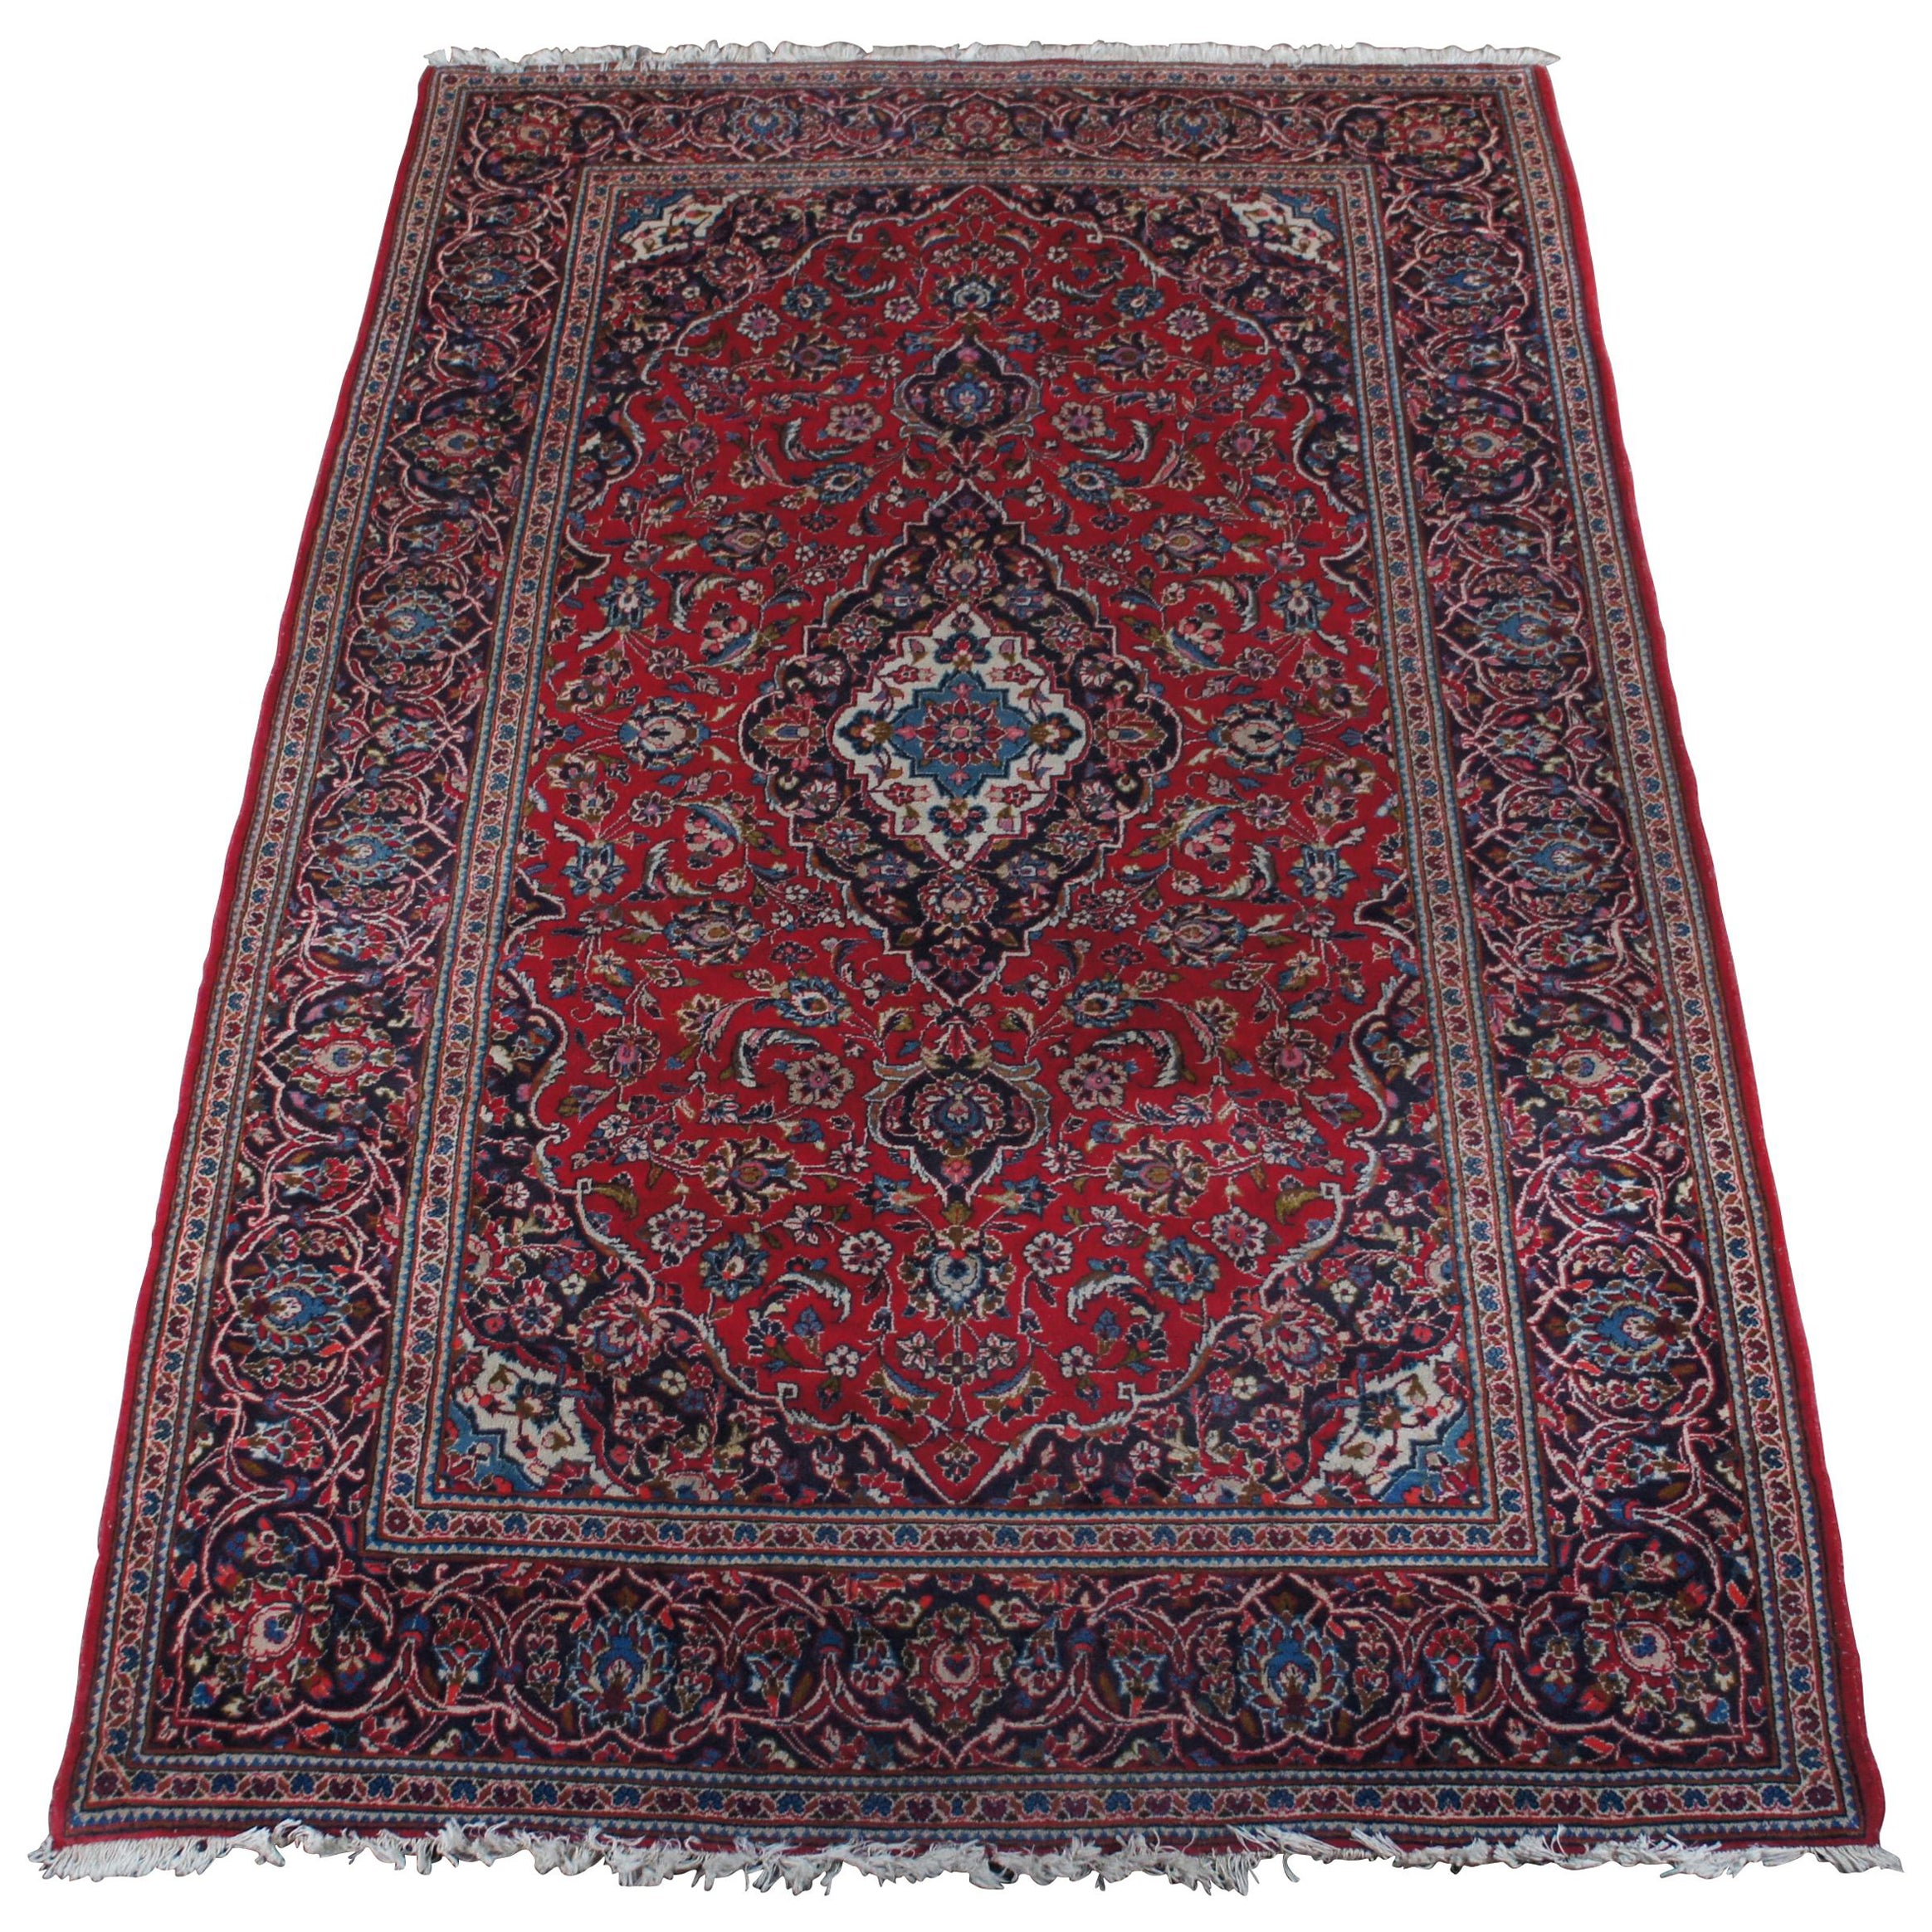 Vintage Hand Knotted Kashan Persian Blue & Red Wool Area Rug Carpet 6.5' x 10' For Sale